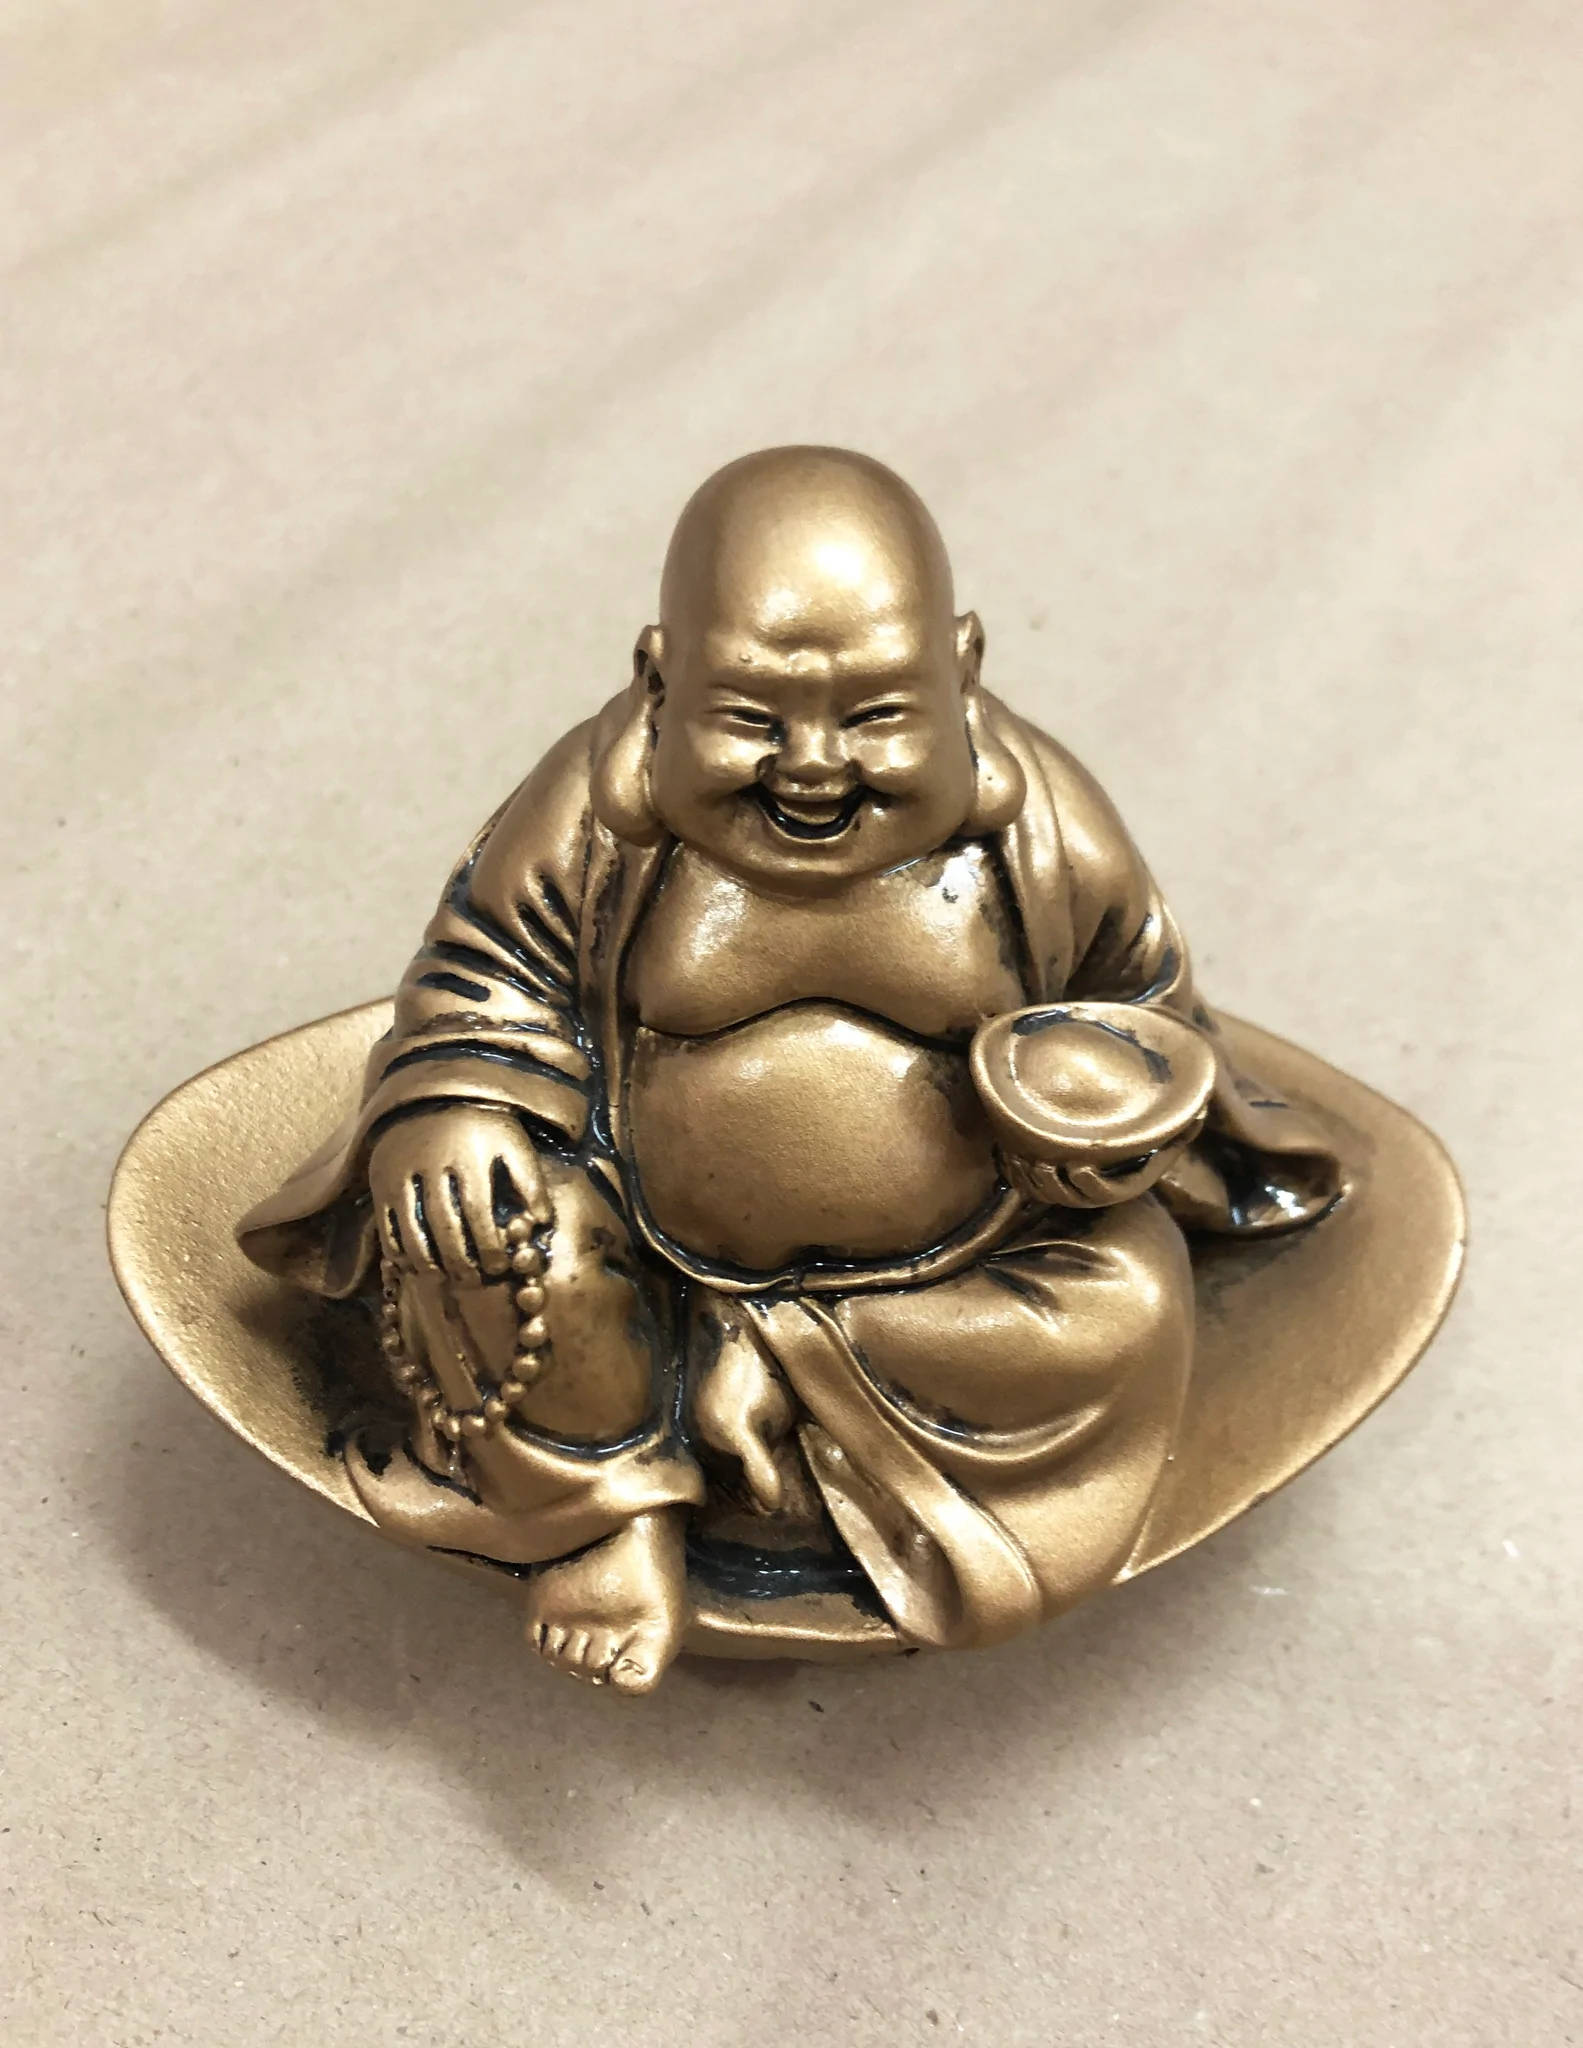 Download Small Laughing Buddha Statue Wallpaper 